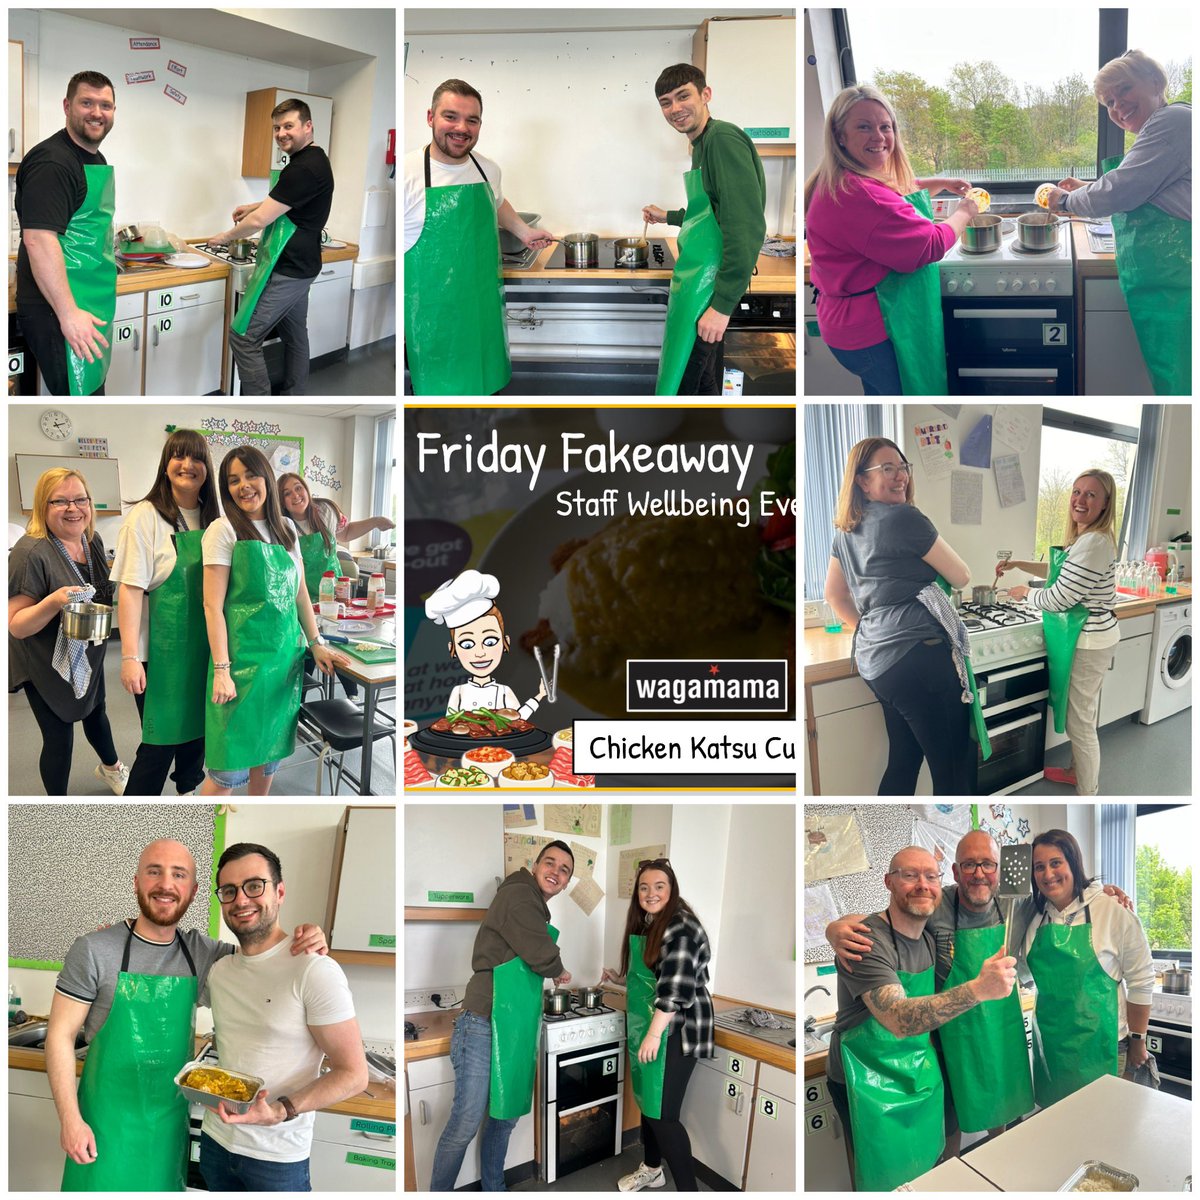 What a lovely afternoon spent with these amazing people for our Friday Fakeaway staff wellbeing event. We made Katsu Chicken Curry. Thanks to @MissReidFCT @MissNKing @MissFergusonHE for all your help to make this session possible ❤️